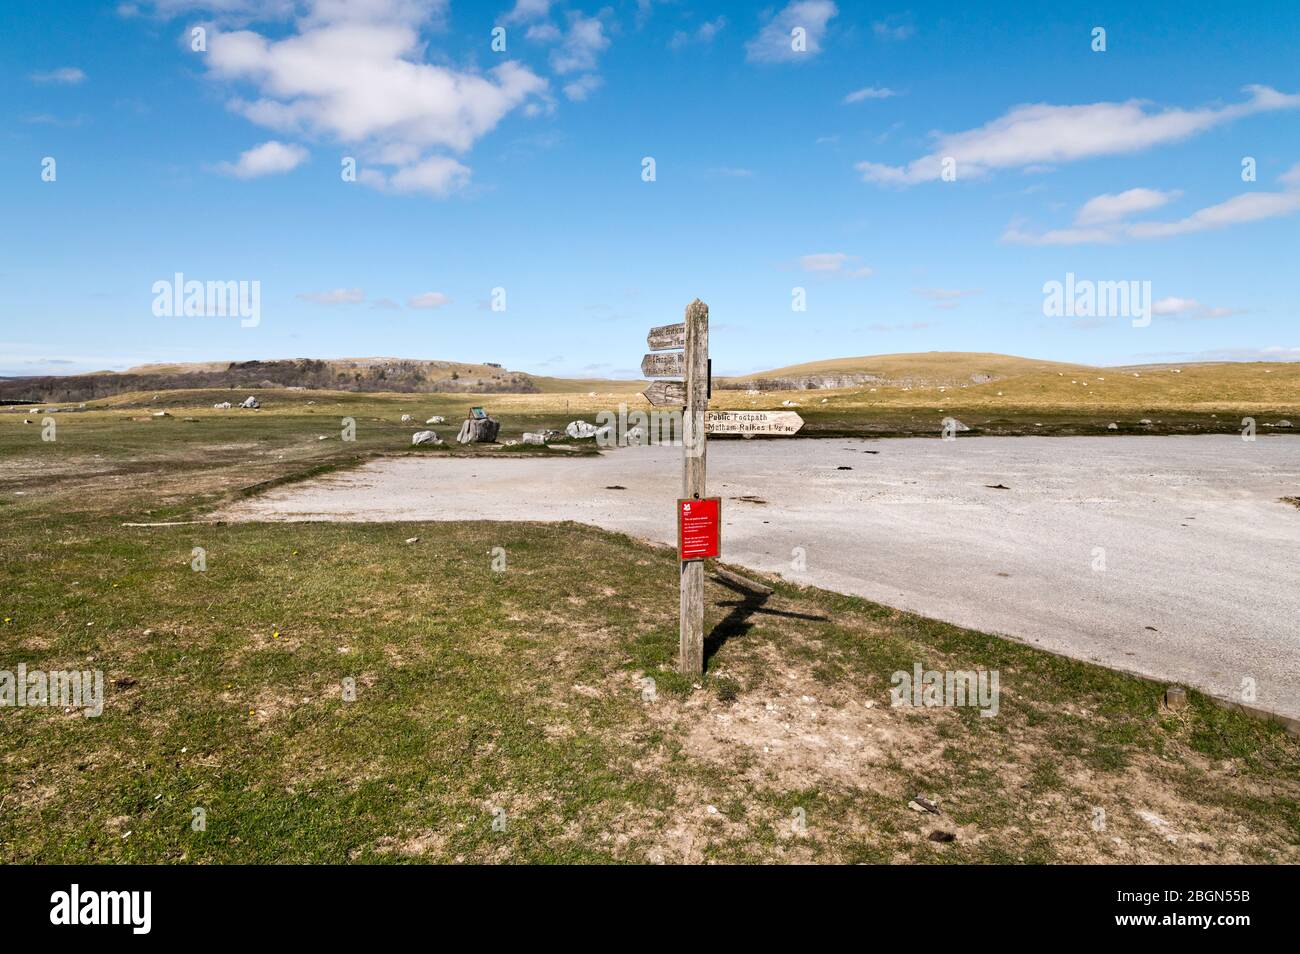 National Trust car park closed at Malham Tarn due to Covid-19, Yorkshire Dales National Park, UK Stock Photo